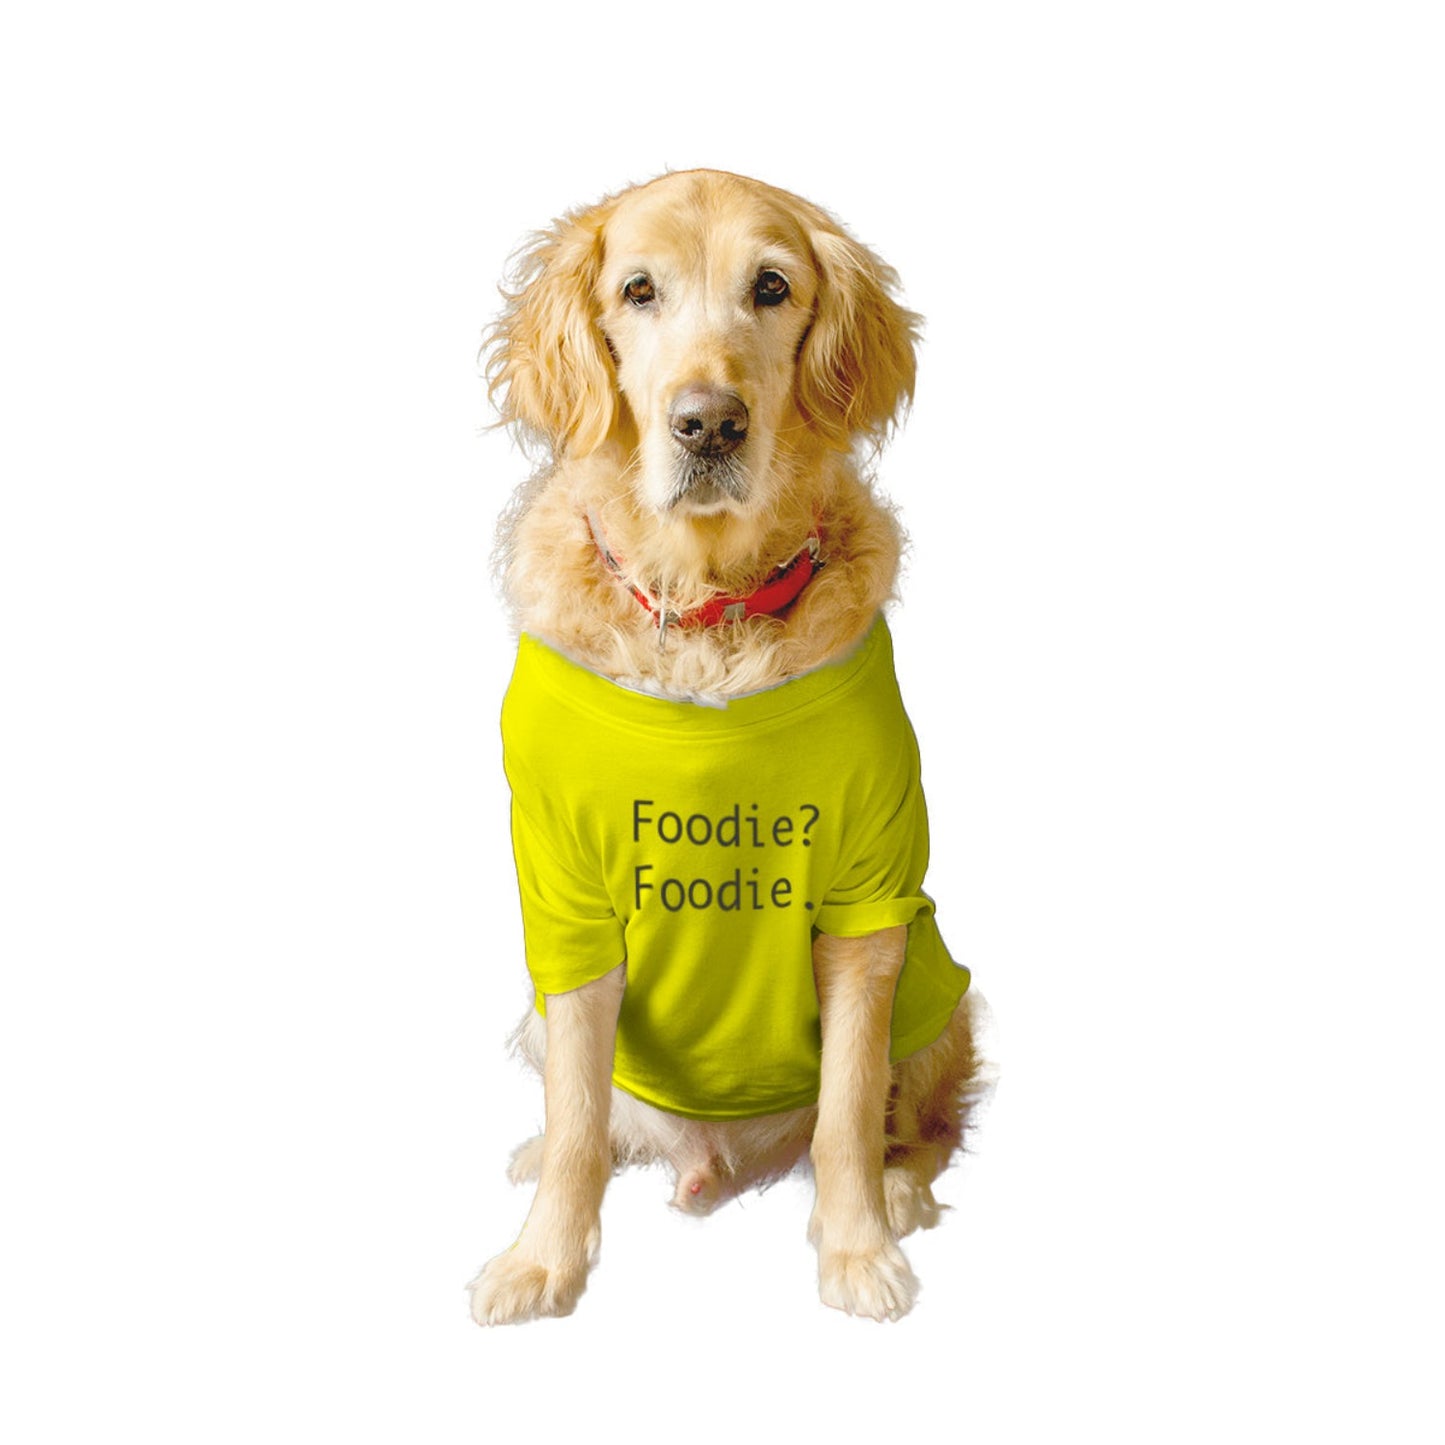 Ruse XX-Small (Chihuahuas, Papillons) / Yellow Ruse Basic Crew Neck "FOODIE? FOODIE." Printed Half Sleeves Dog Tee